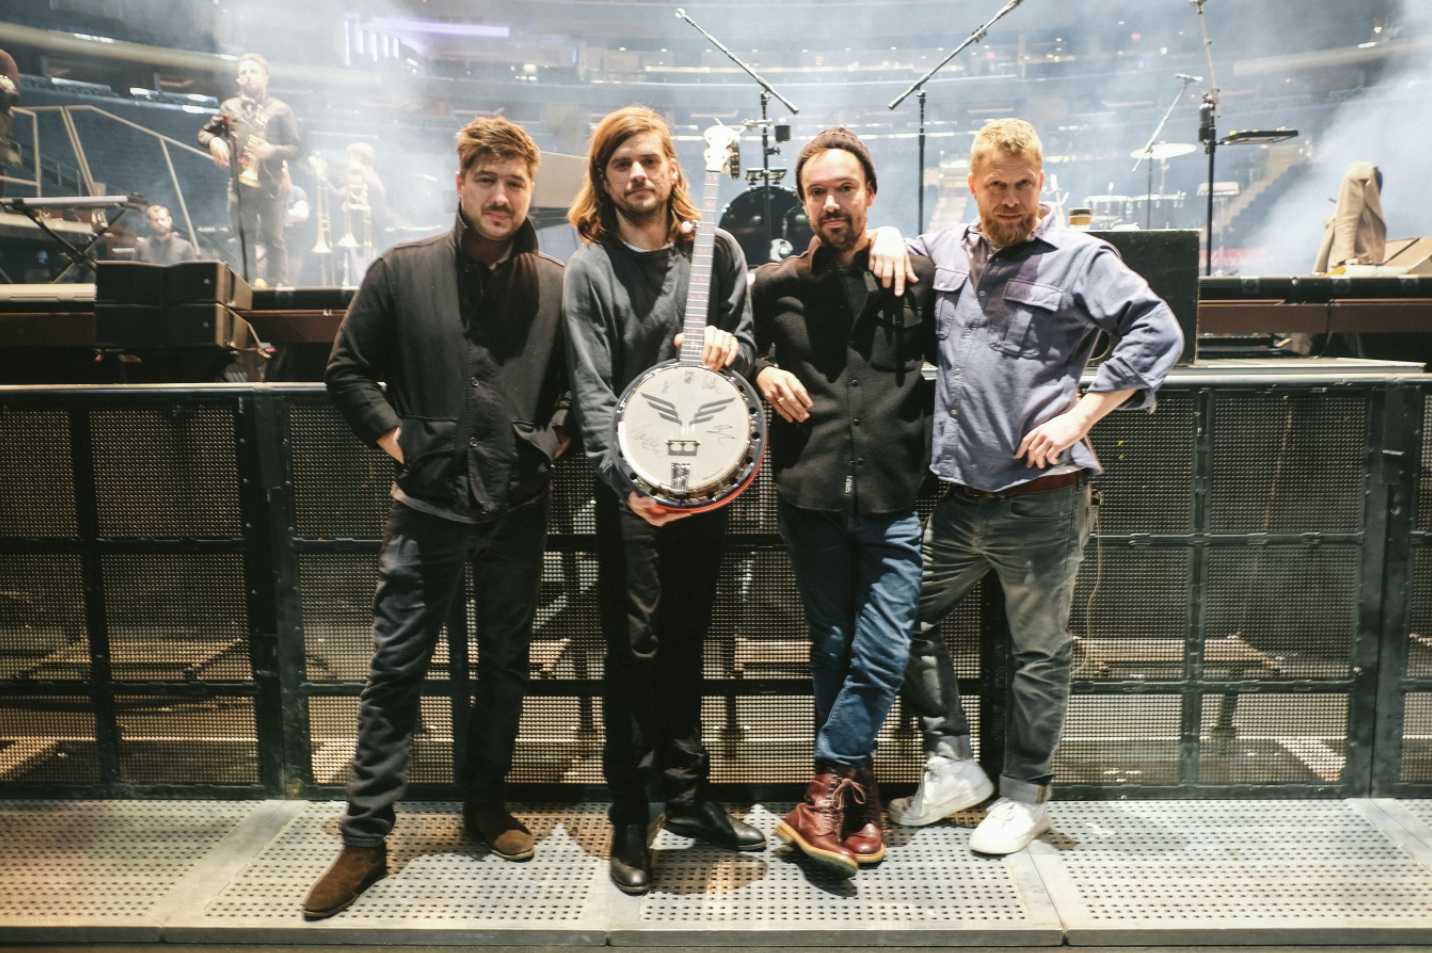 Mumford & Sons with the Canada Charity Goodtime Banjo